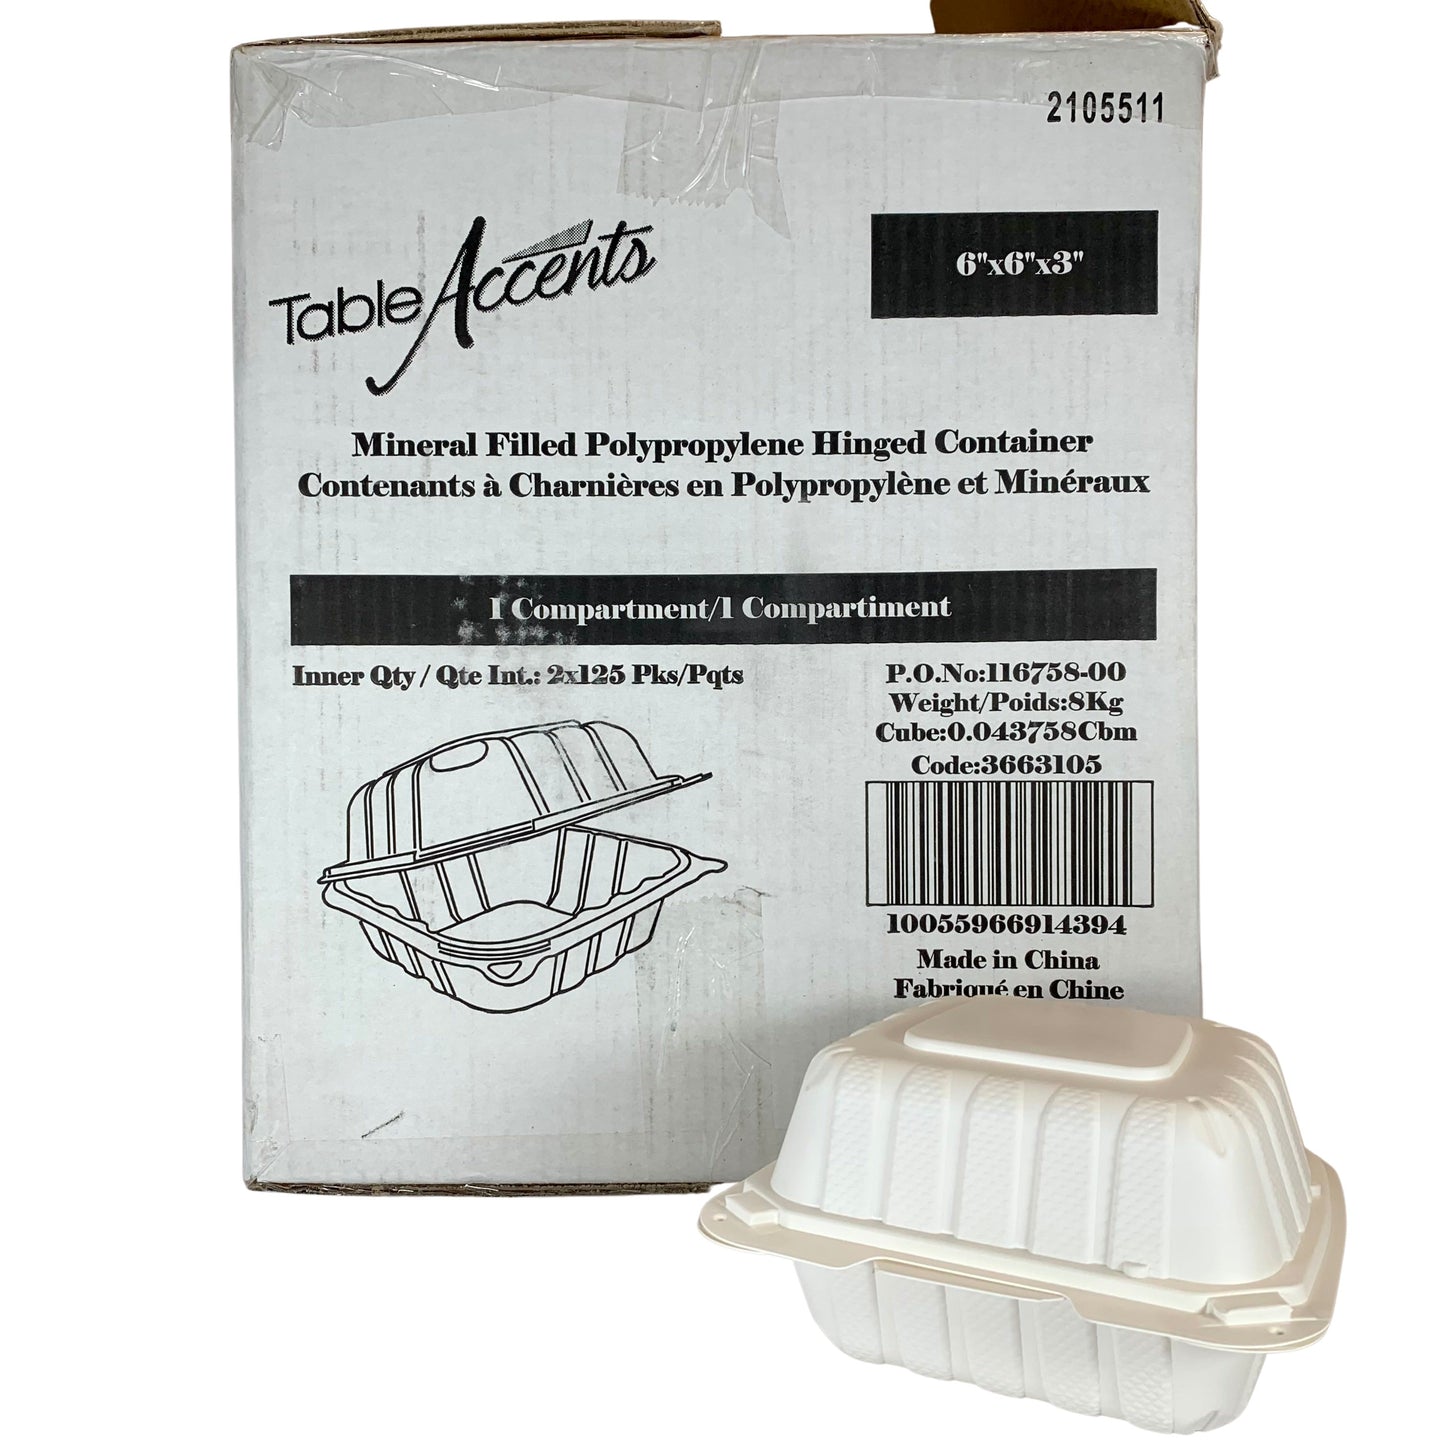 Compostable Hinged Container 6X6X3" 500/case